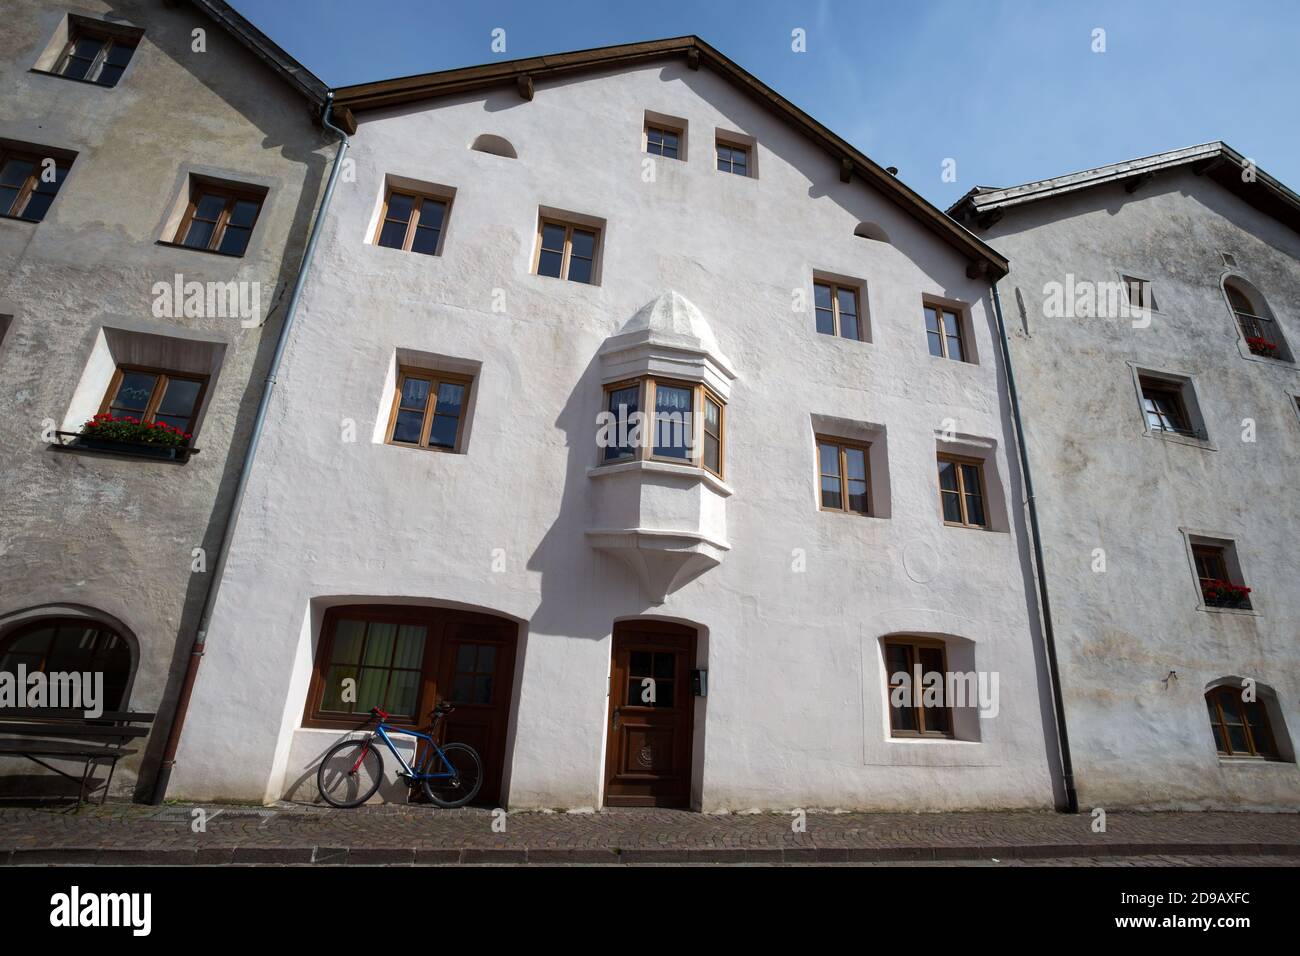 The typical and picturesque buildings of the town of Glorenza, province of Bolzano, South Tyrol, Italy Stock Photo